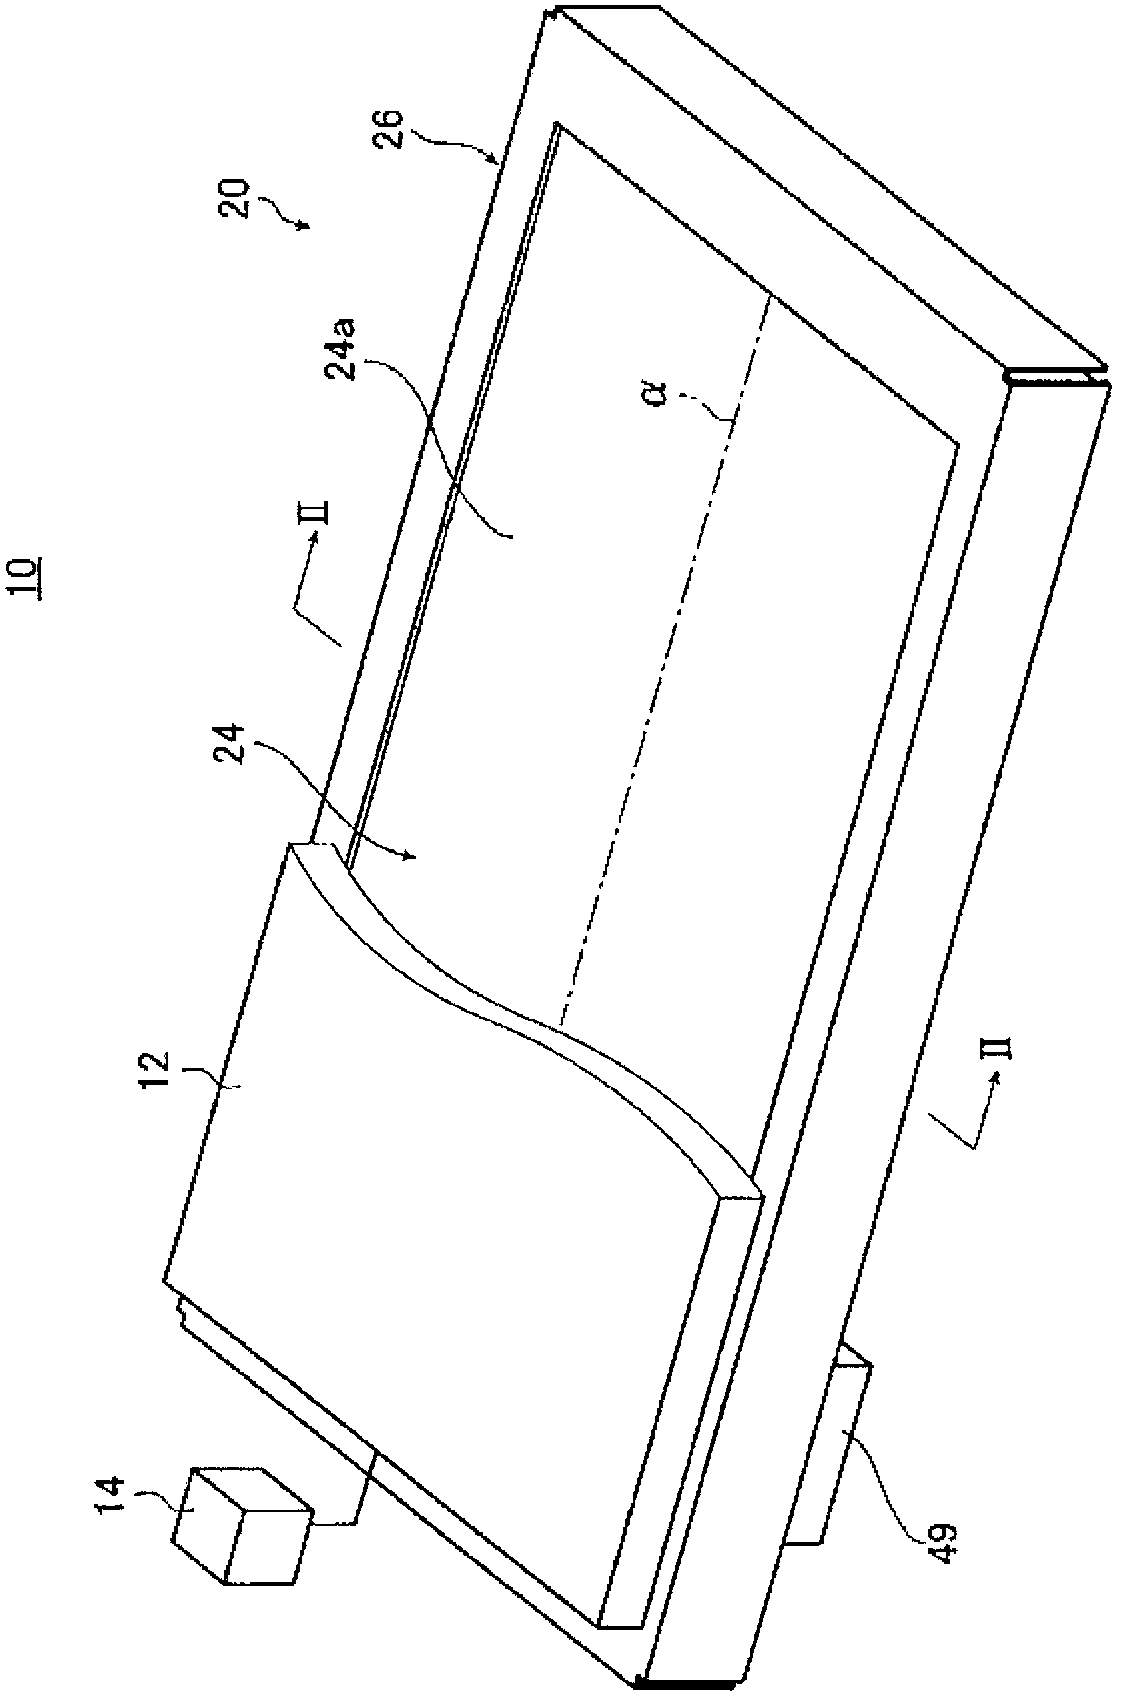 Light guide plate, surface illuminating device, and liquid crystal display device